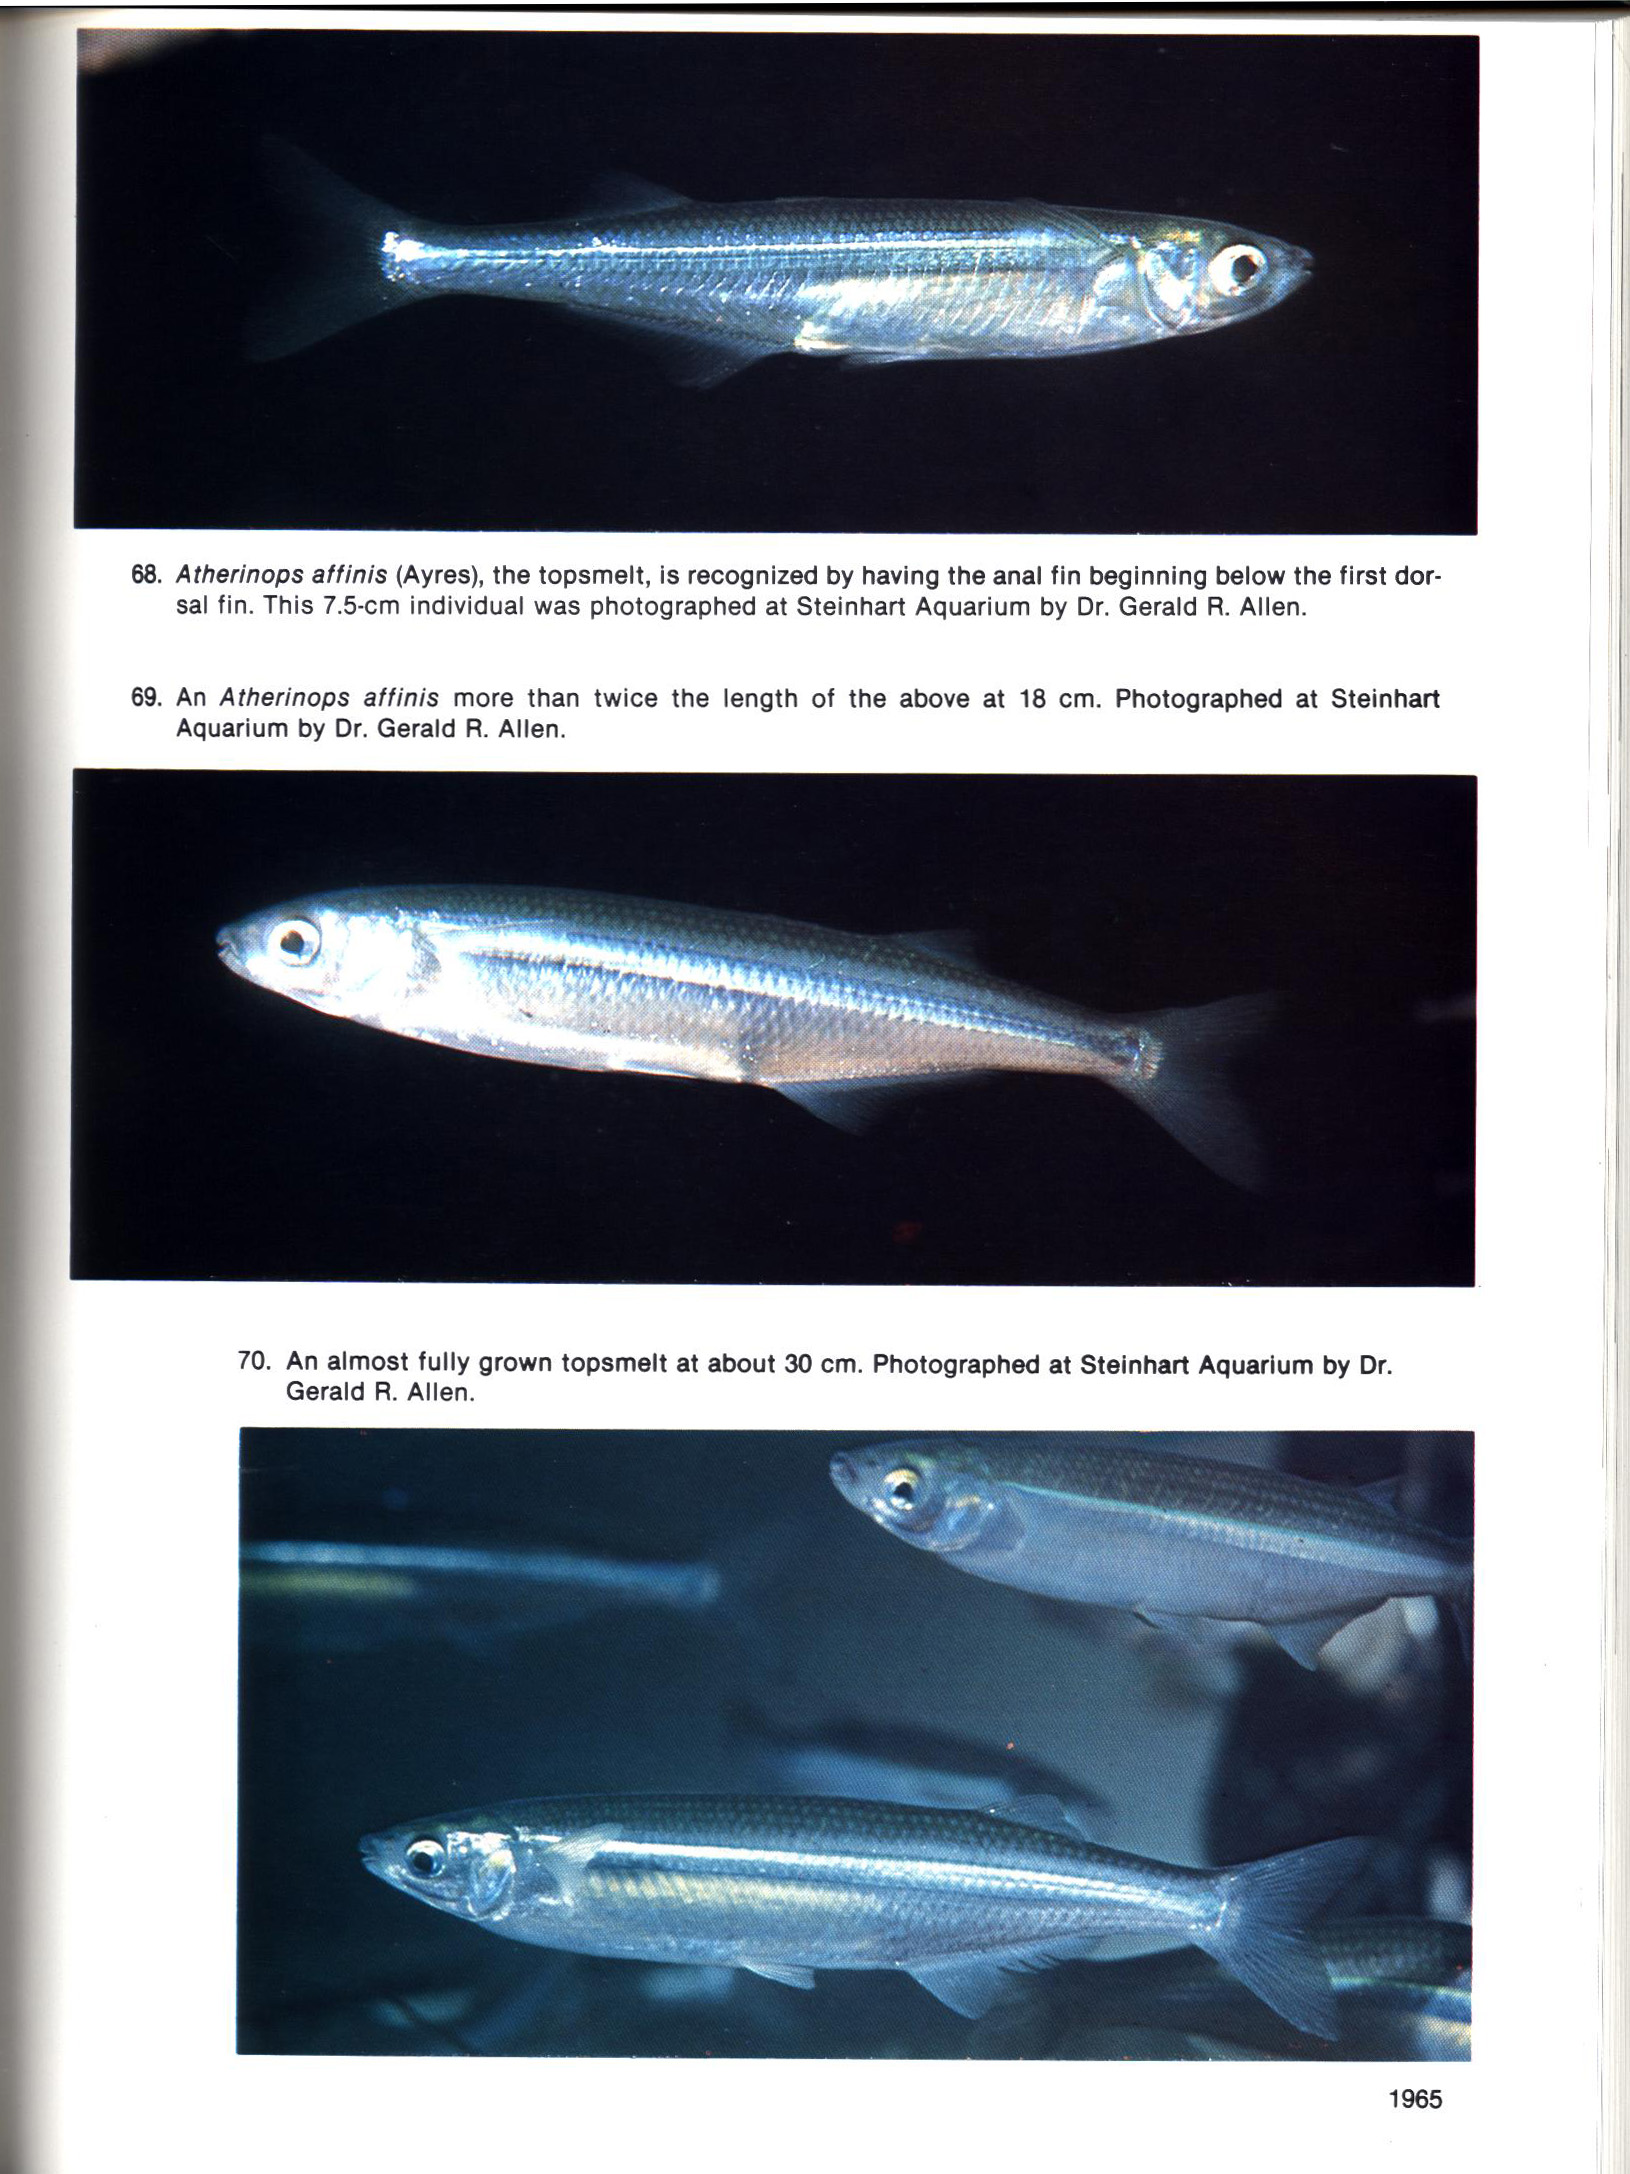 FISHES OF CALIFORNIA AND WESTERN MEXICO: Pacific marine fishes, Book 8 (California & Western Mexico). tfhp6102e